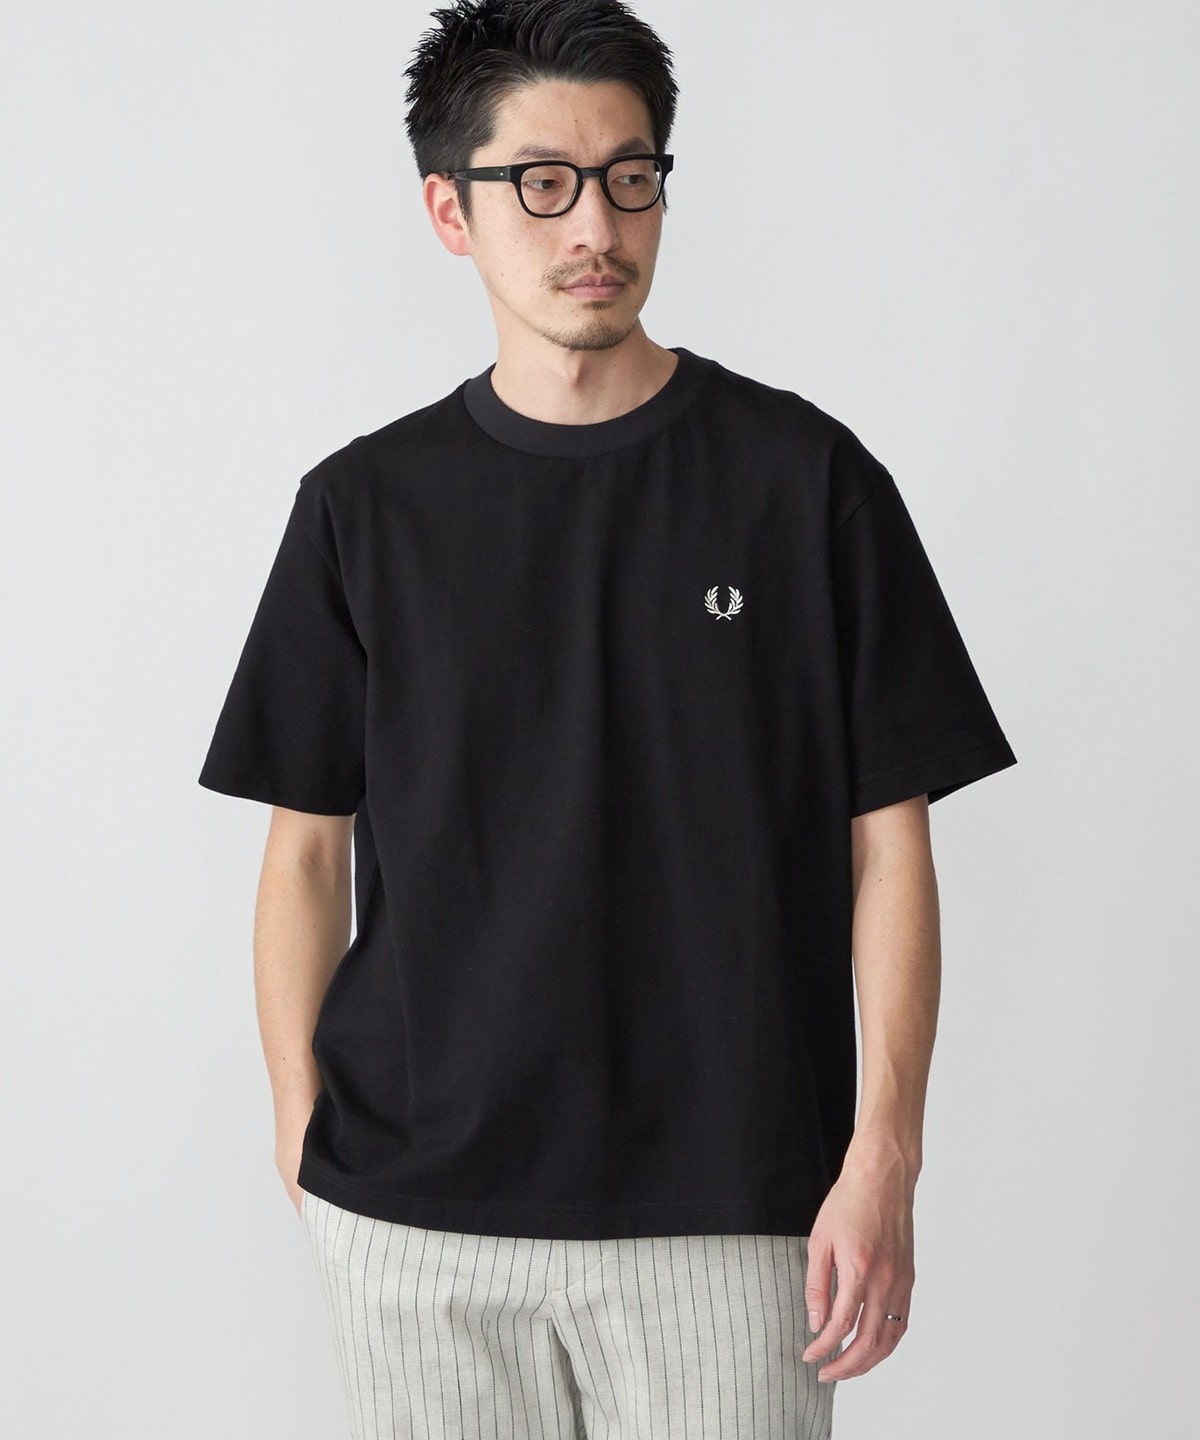 FRED PERRY 黒のシャツ